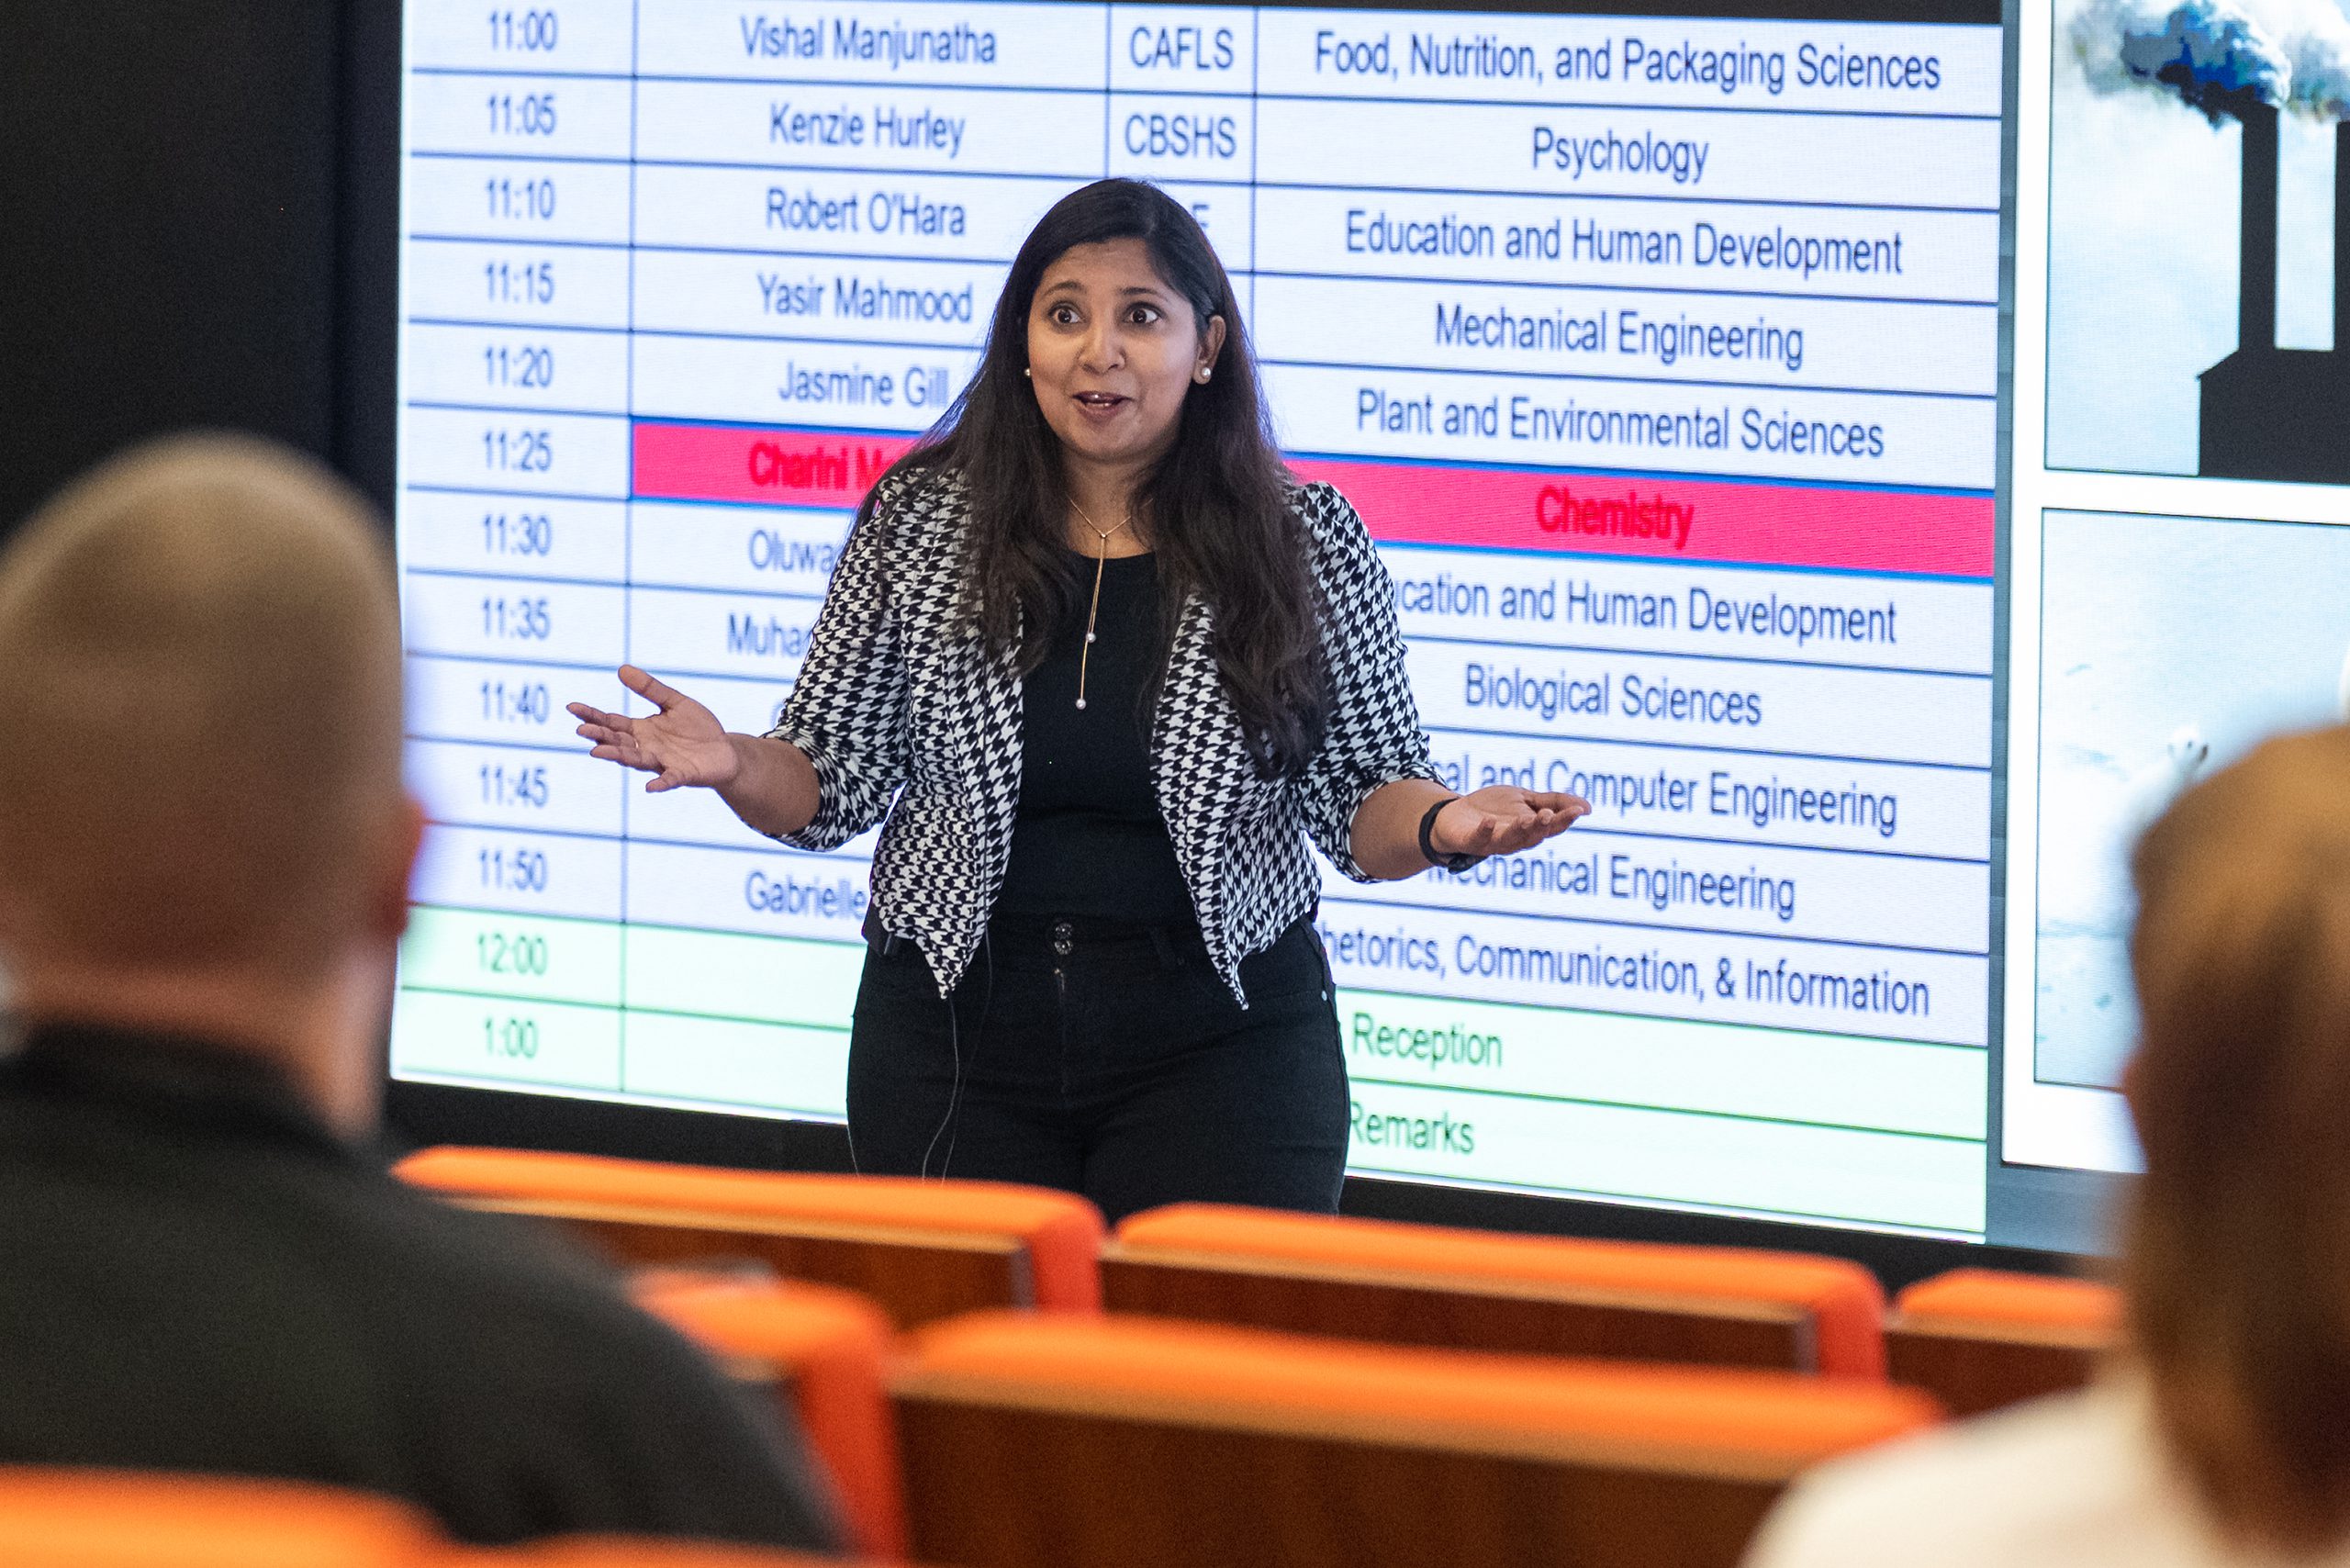 A woman presents in front of a large screen displaying a table with various categories listed. Chemistry is highlighted in red.